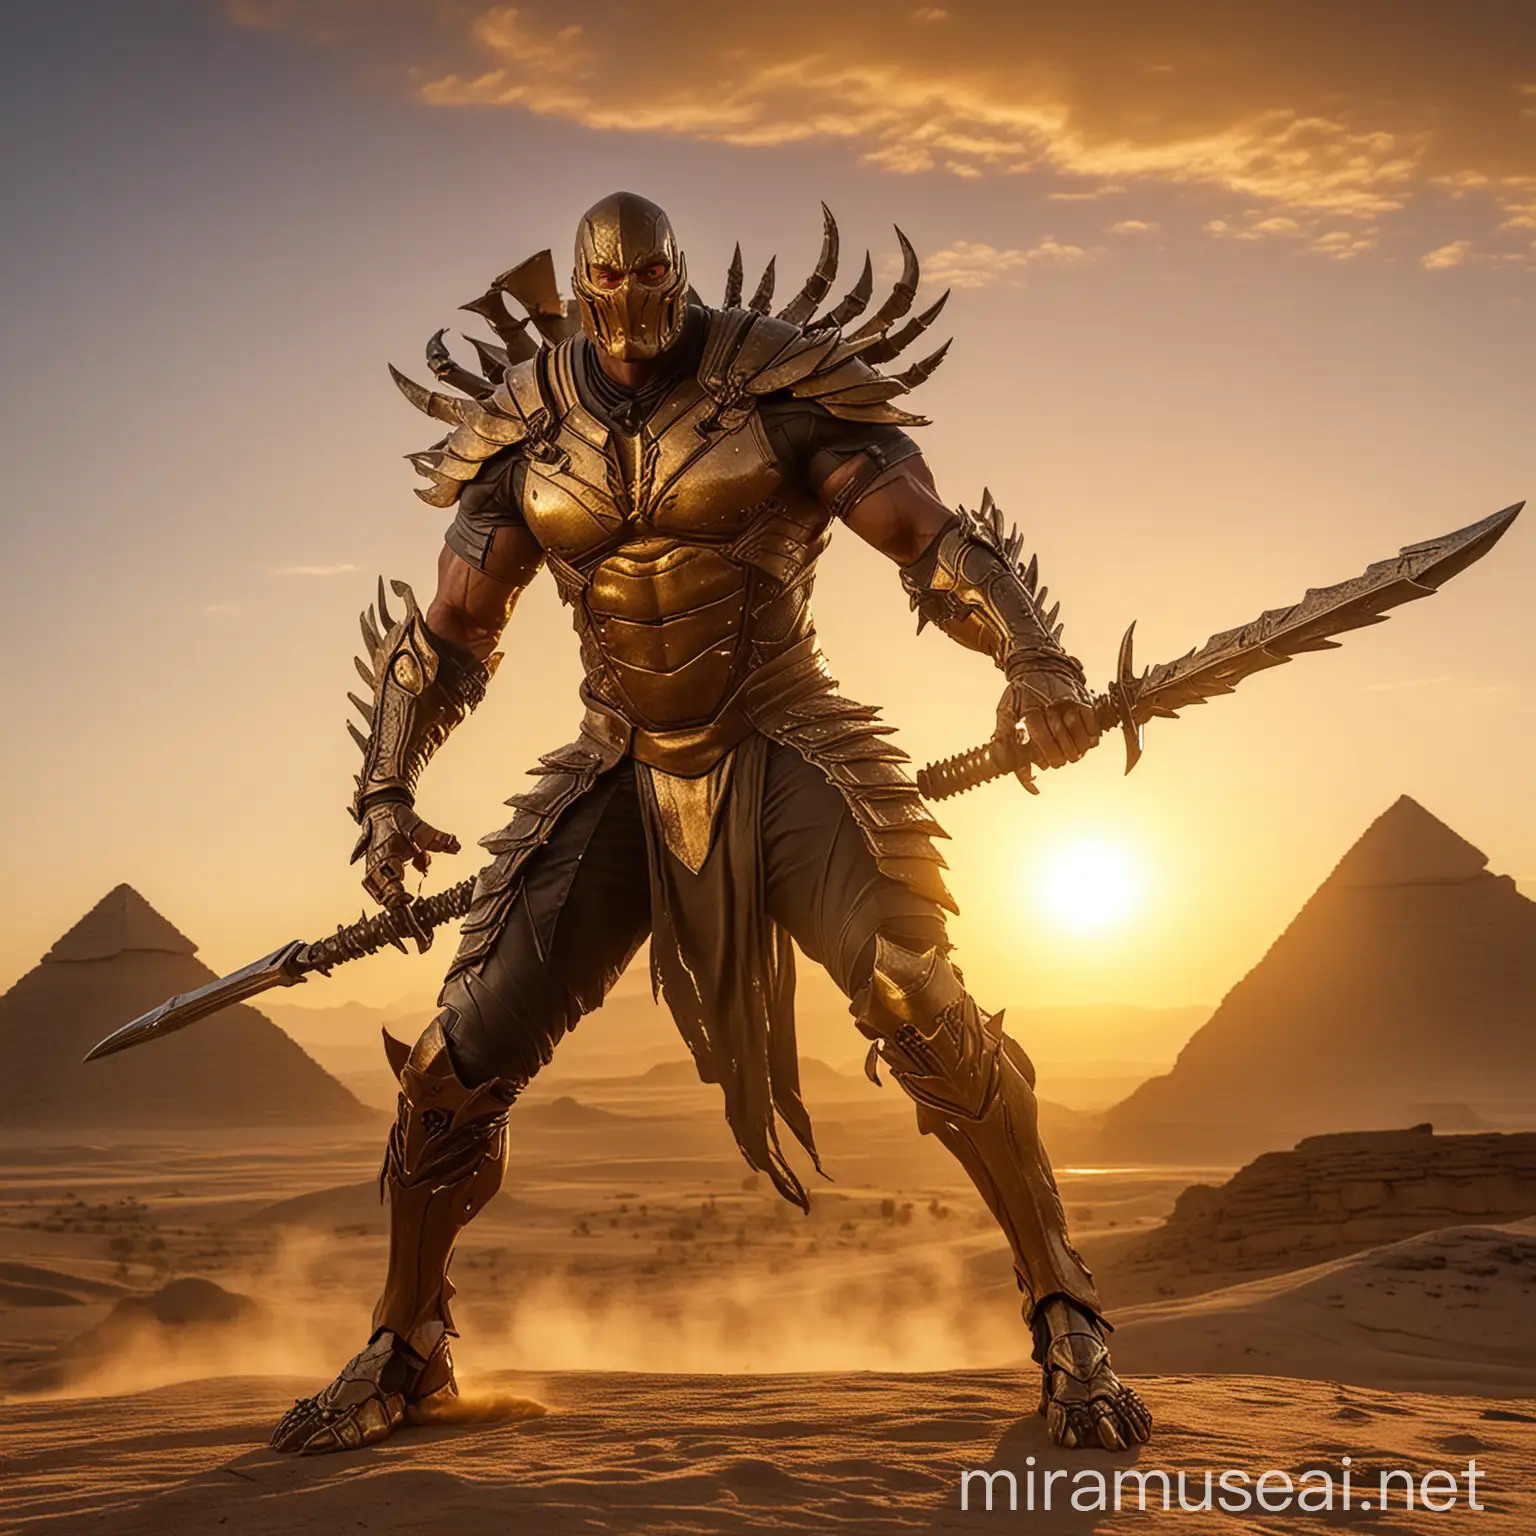 Mythical Warrior The Rock Johnson in Scorpion Armor with SolarFlare Sword at Desert Pyramid Dawn